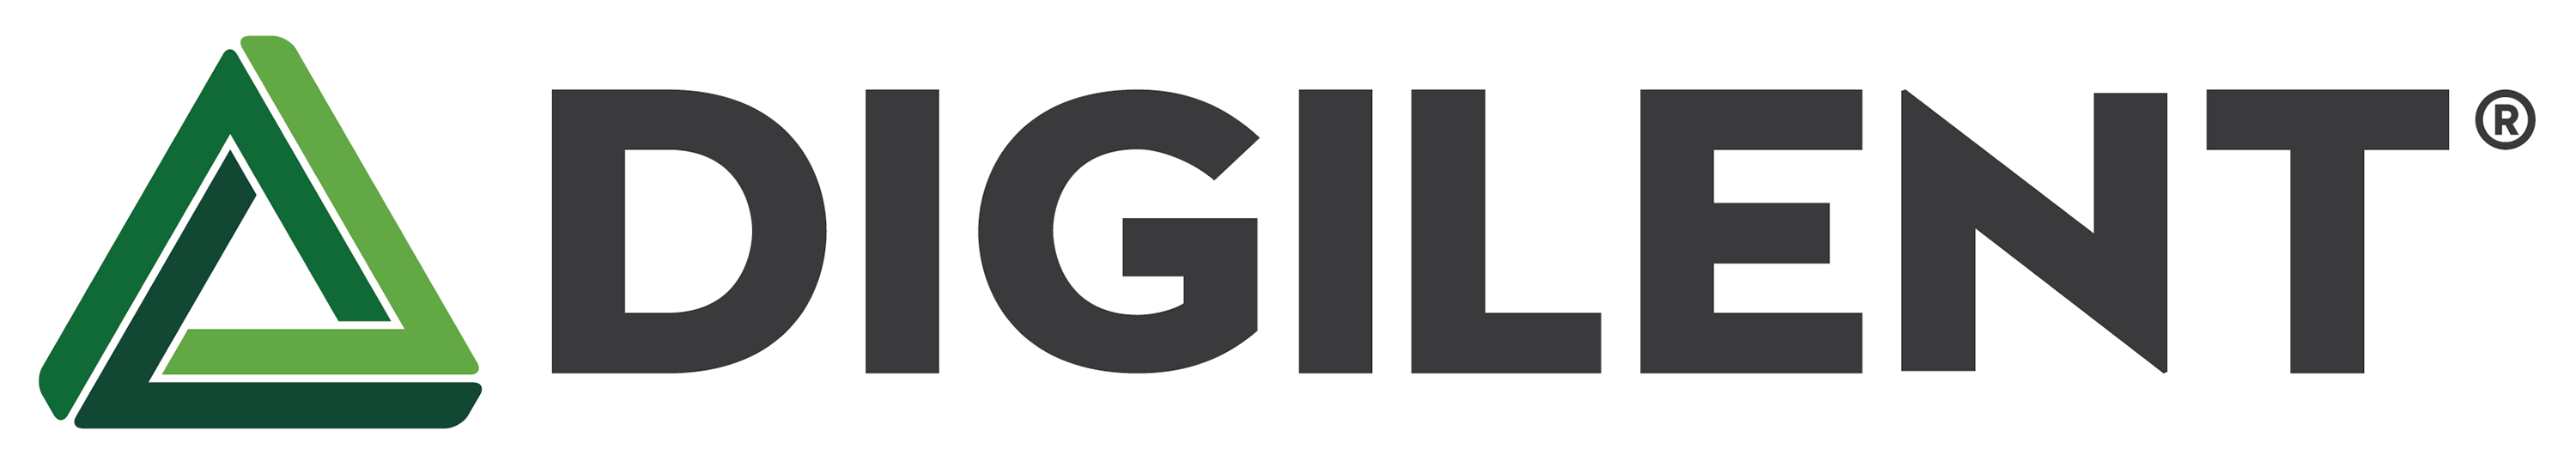 identity:digilent-logo2015-color_on_white-3000.png